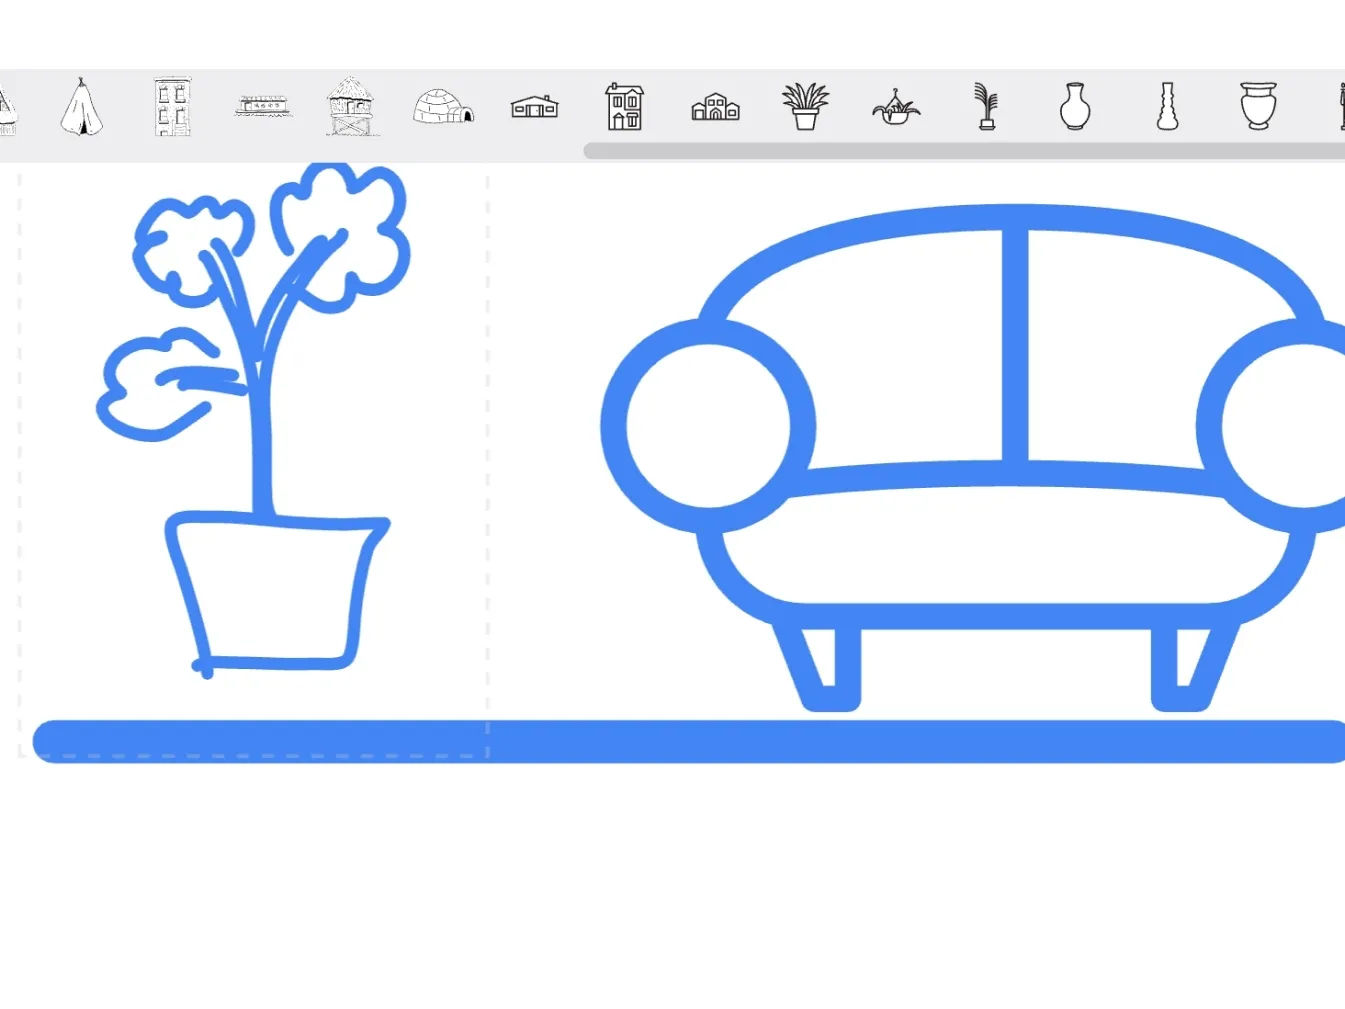 Not good at drawing ? Google's Autodraw is here to help you - SocialMaharaj